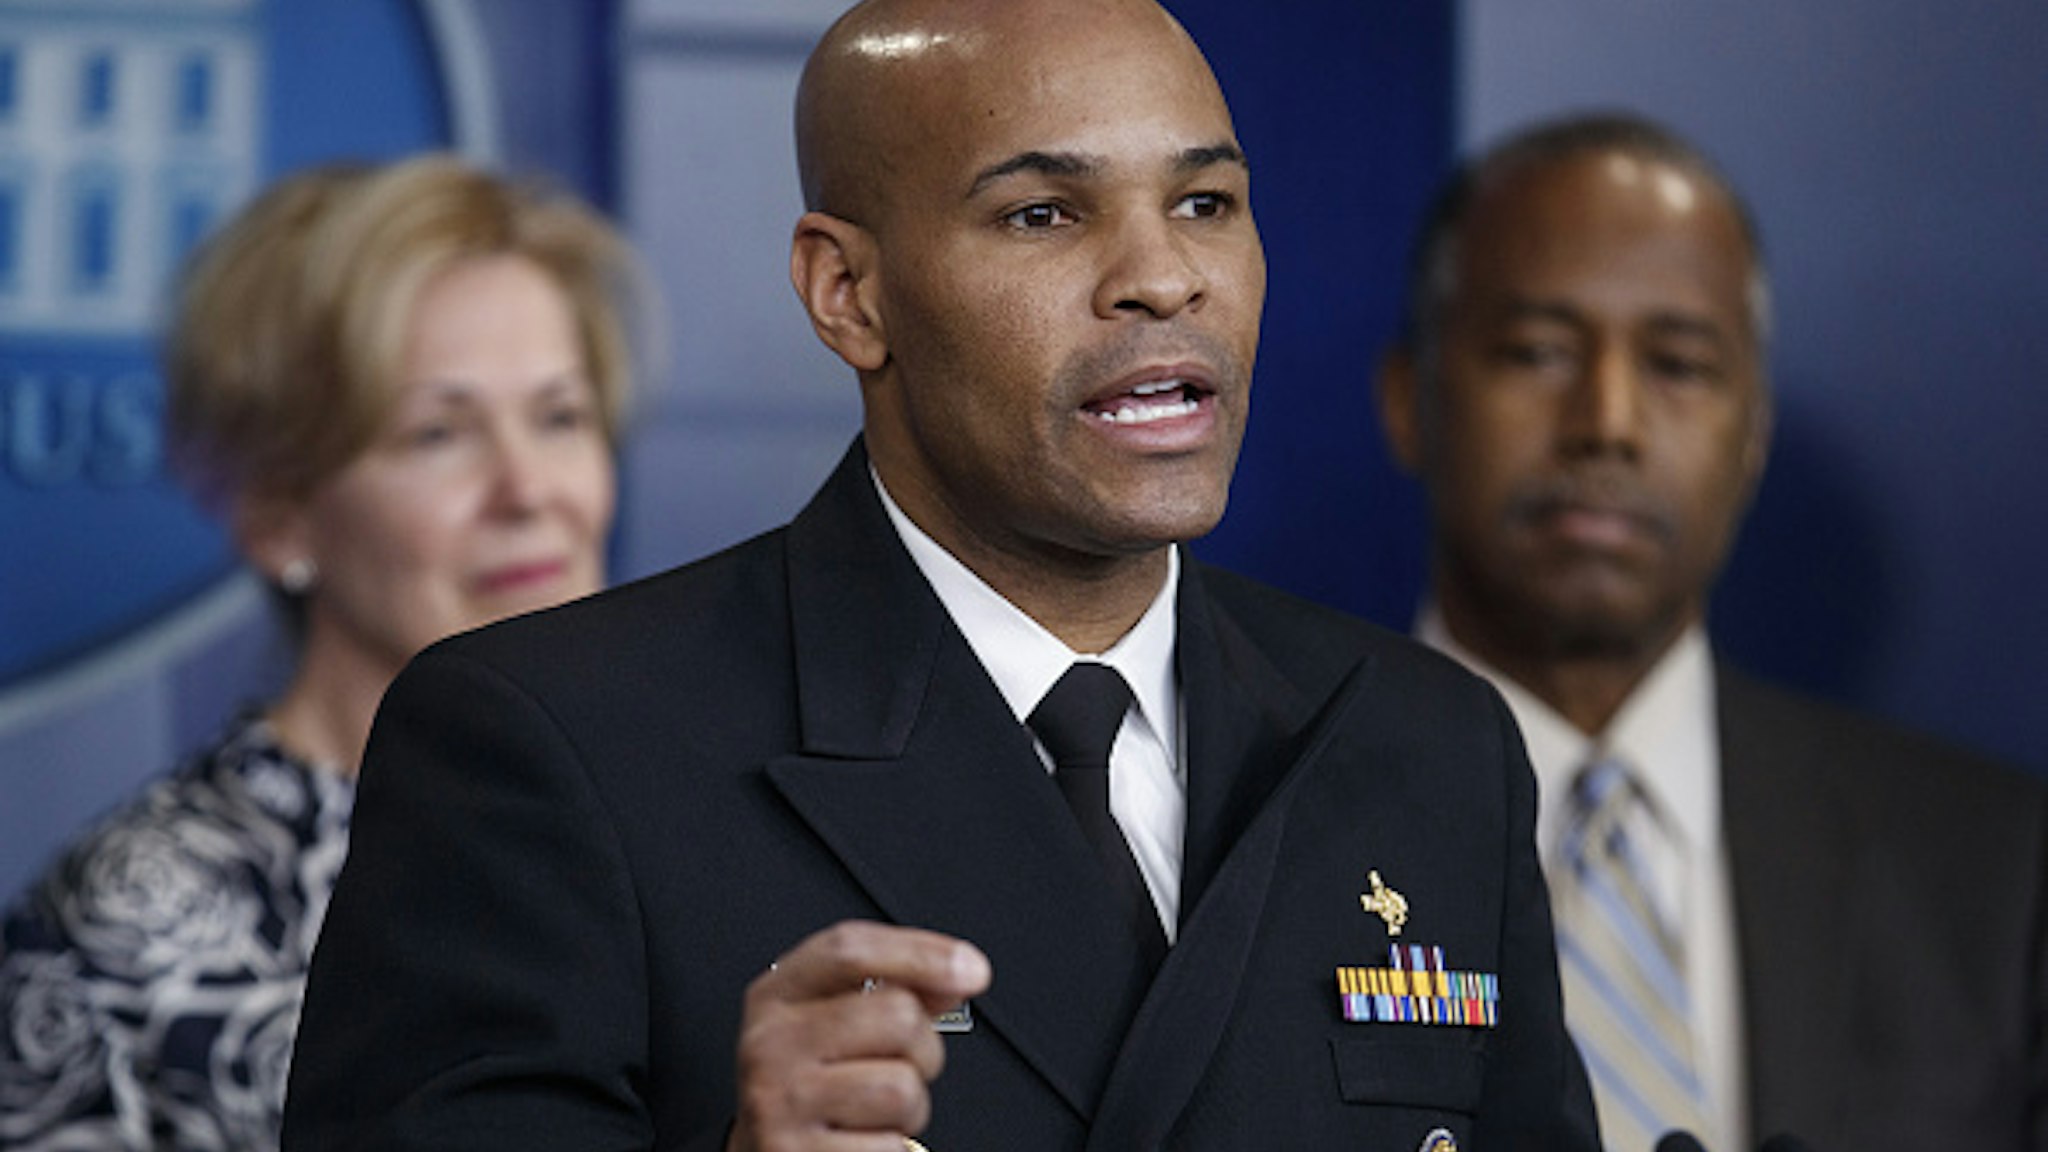 Vice Admiral Jerome Adams, U.S. Surgeon General, speaks during a news conference in the briefing room of the White House in Washington, D.C., U.S., on Saturday, March 14, 2020. President Donald Trump said he took a test to determine whether he has coronavirus, days after learning that hes come in contact with people who were infected or are concerned theyve got the virus.